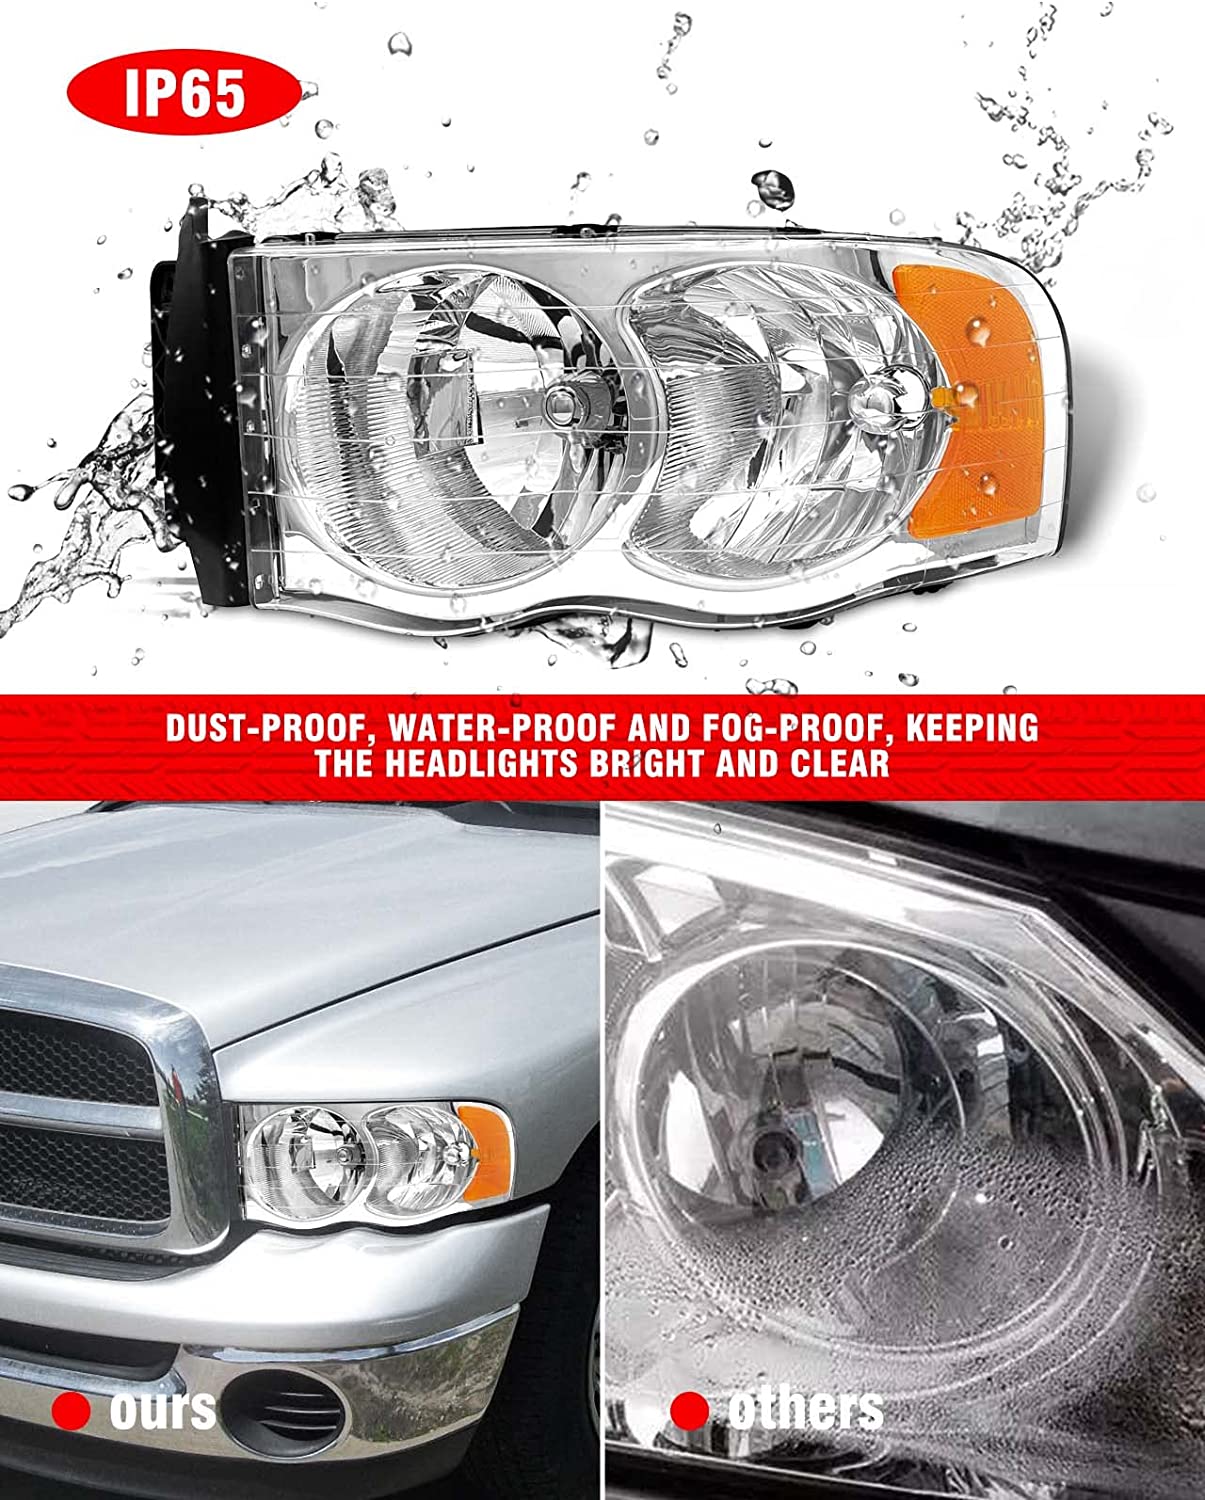 ADCARLIGHTS 2002-2005 Dodge Ram Headlight Assembly for Dodge Ram 1500 / Ram 2500 3500 2003-2005 Ram 2500 3500 Clear Chrome Lens with Amber Reflector Replacement Left & Right